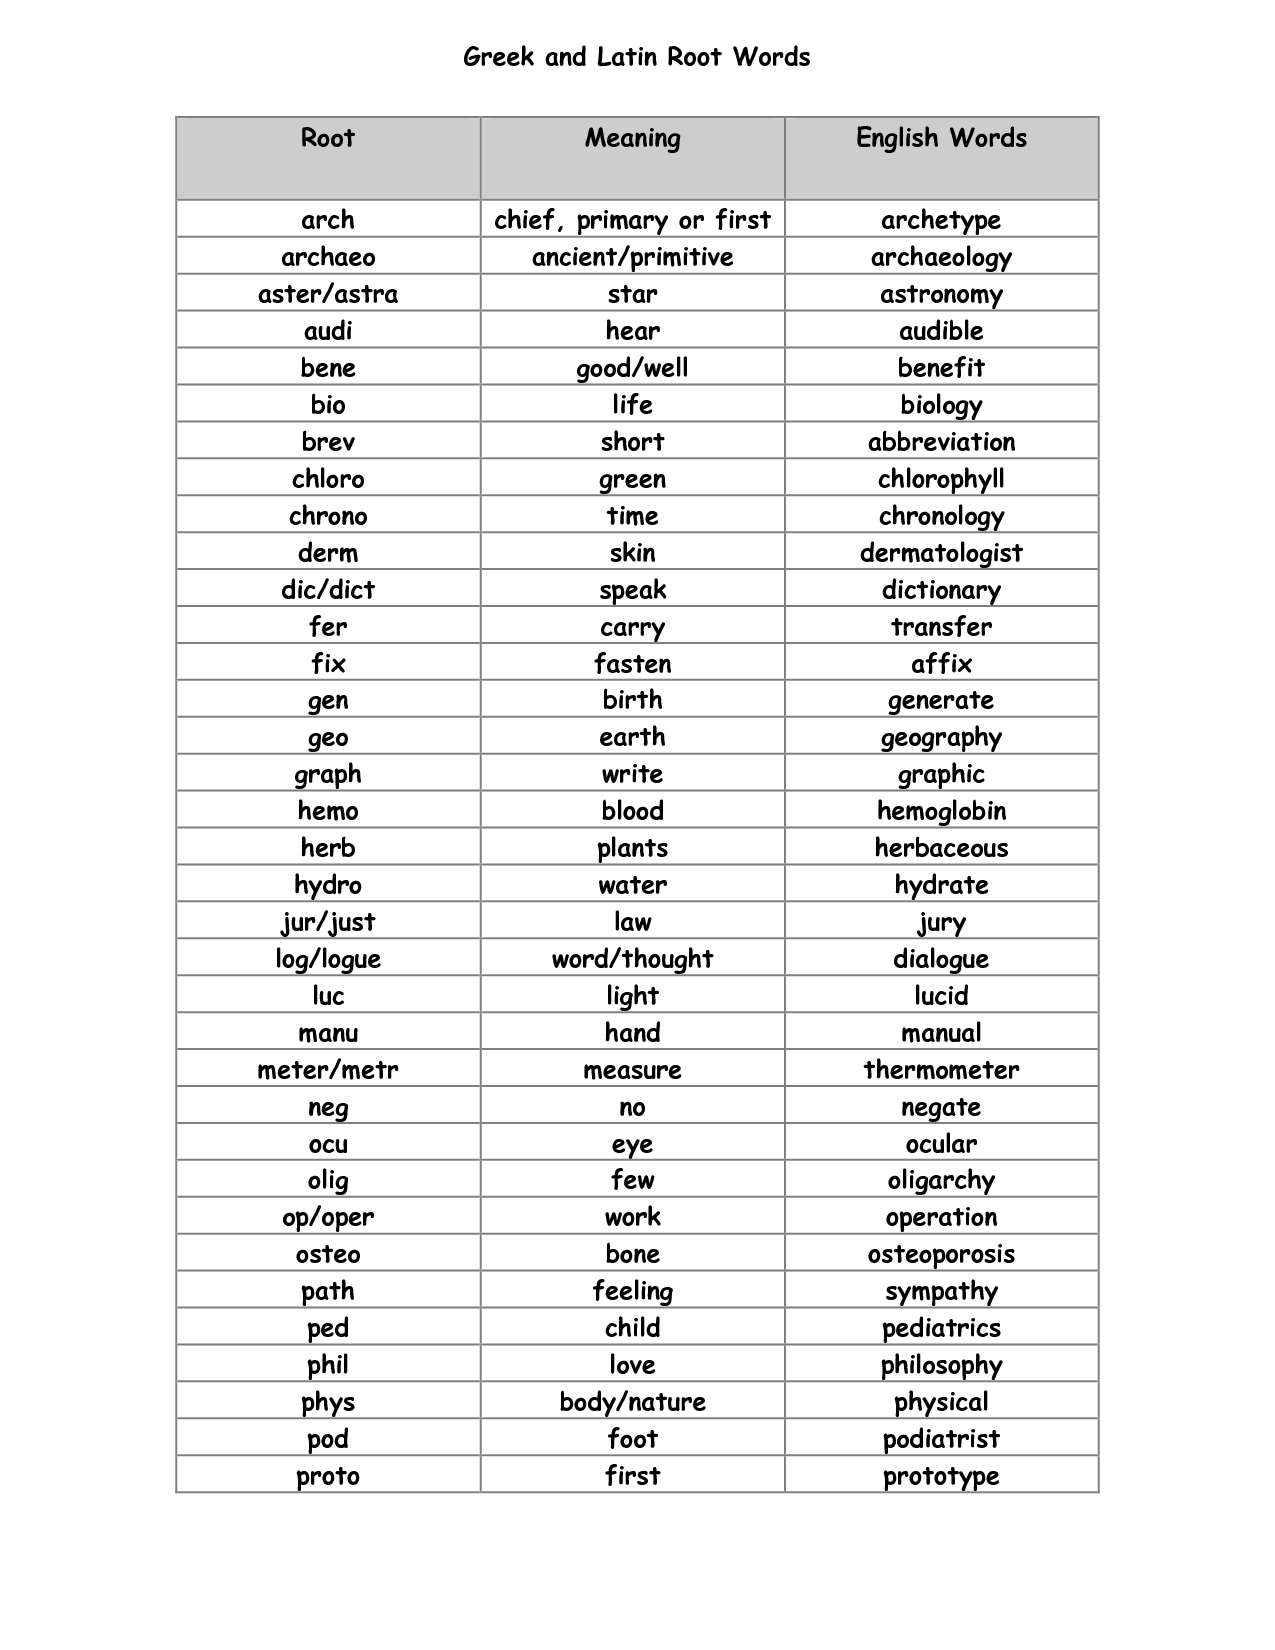 20-best-images-of-greek-and-latin-affixes-worksheets-latin-roots-prefixes-and-suffixes-word